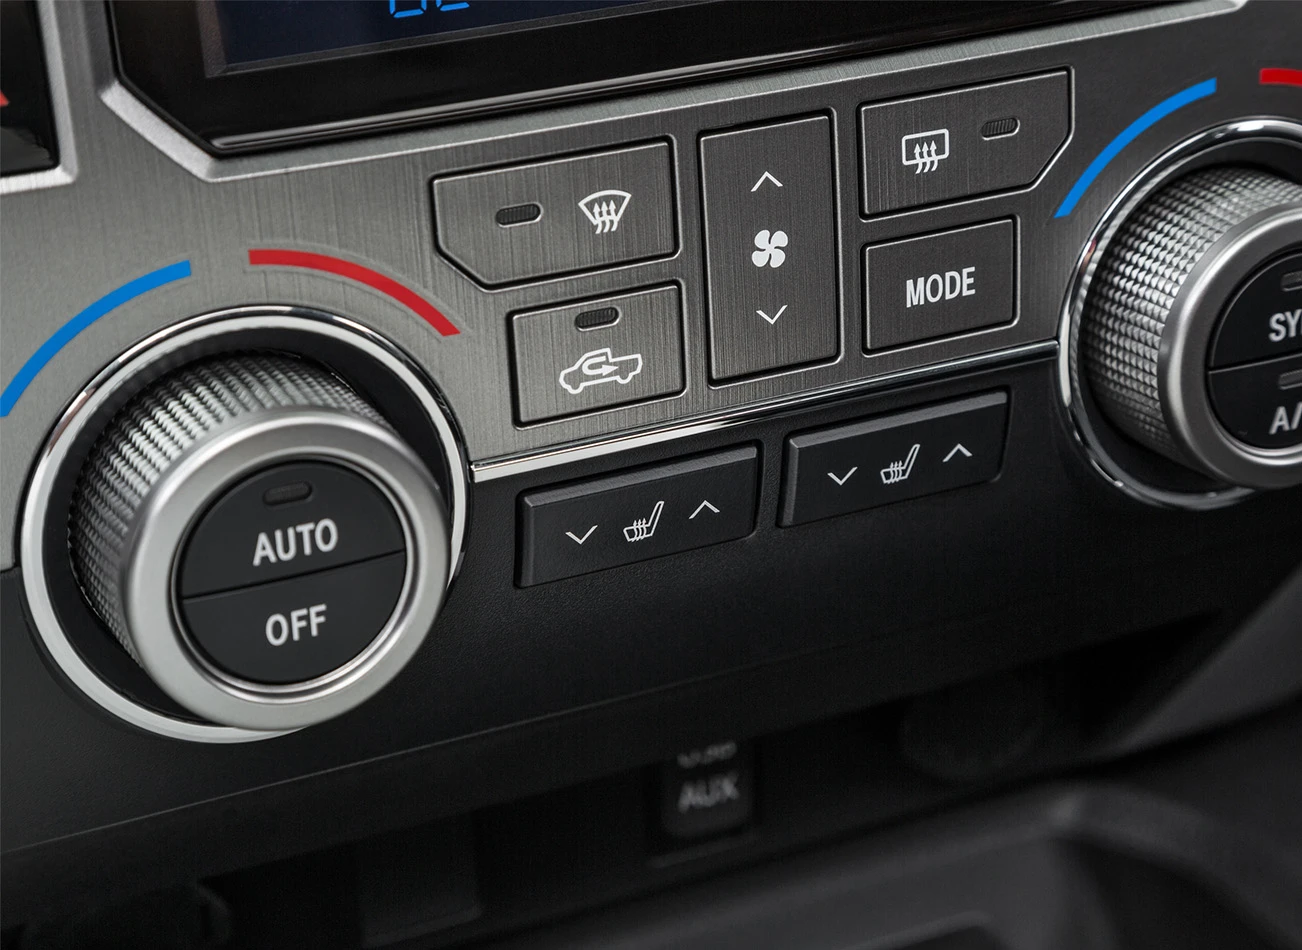 2016 Toyota Tundra: Heating system buttons | CarMax